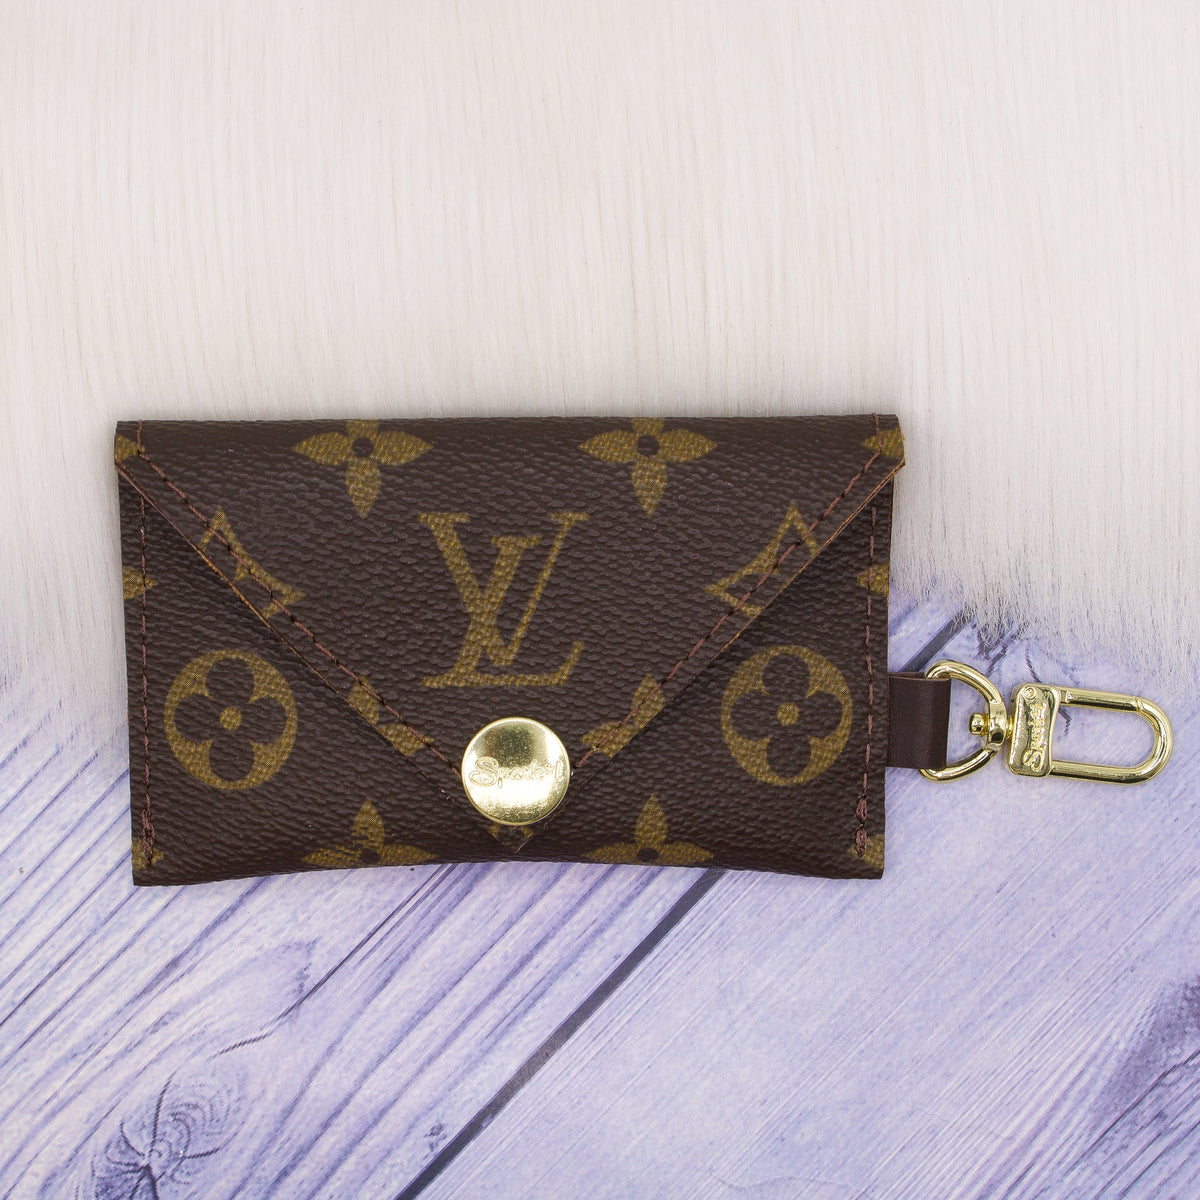 Upcycled LV Monogram 4 x 2.5 Envelope Wallet with Keychain – Spark*l